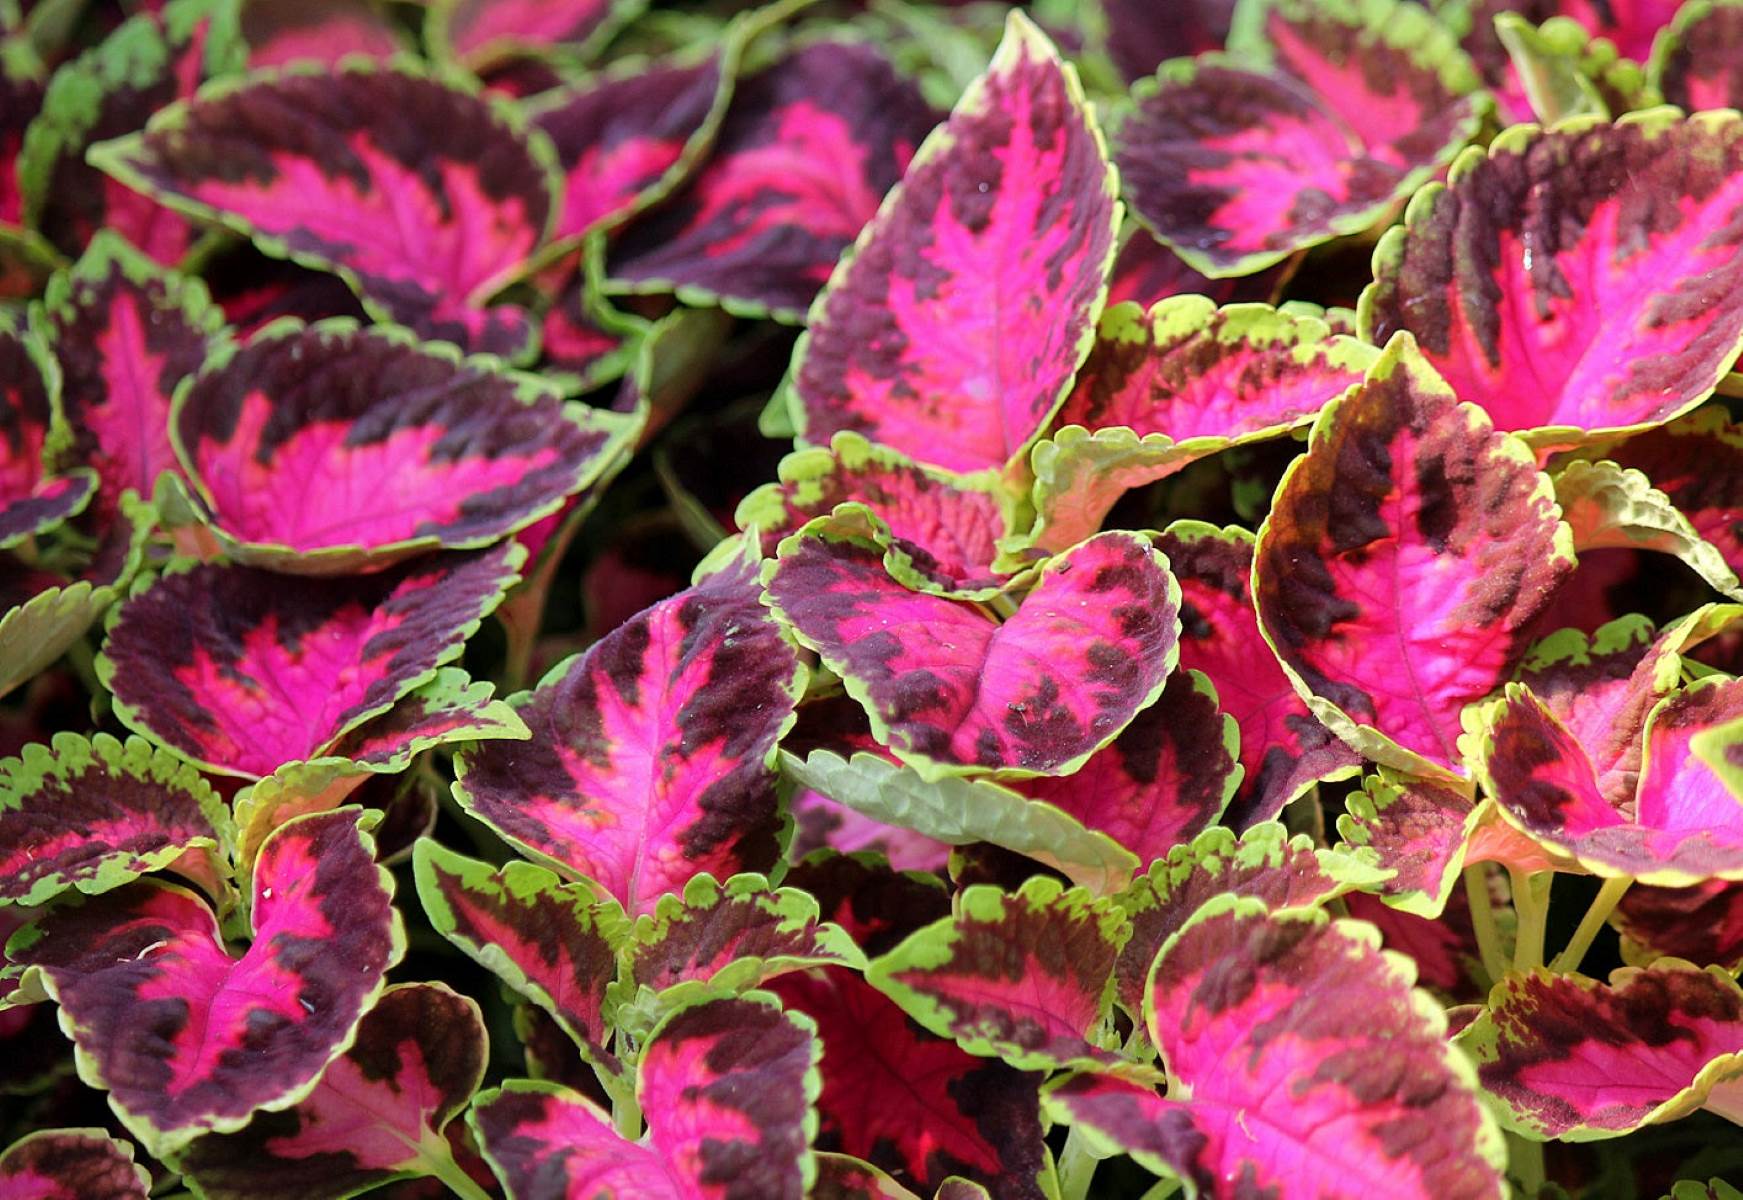 How To Save Coleus Seeds